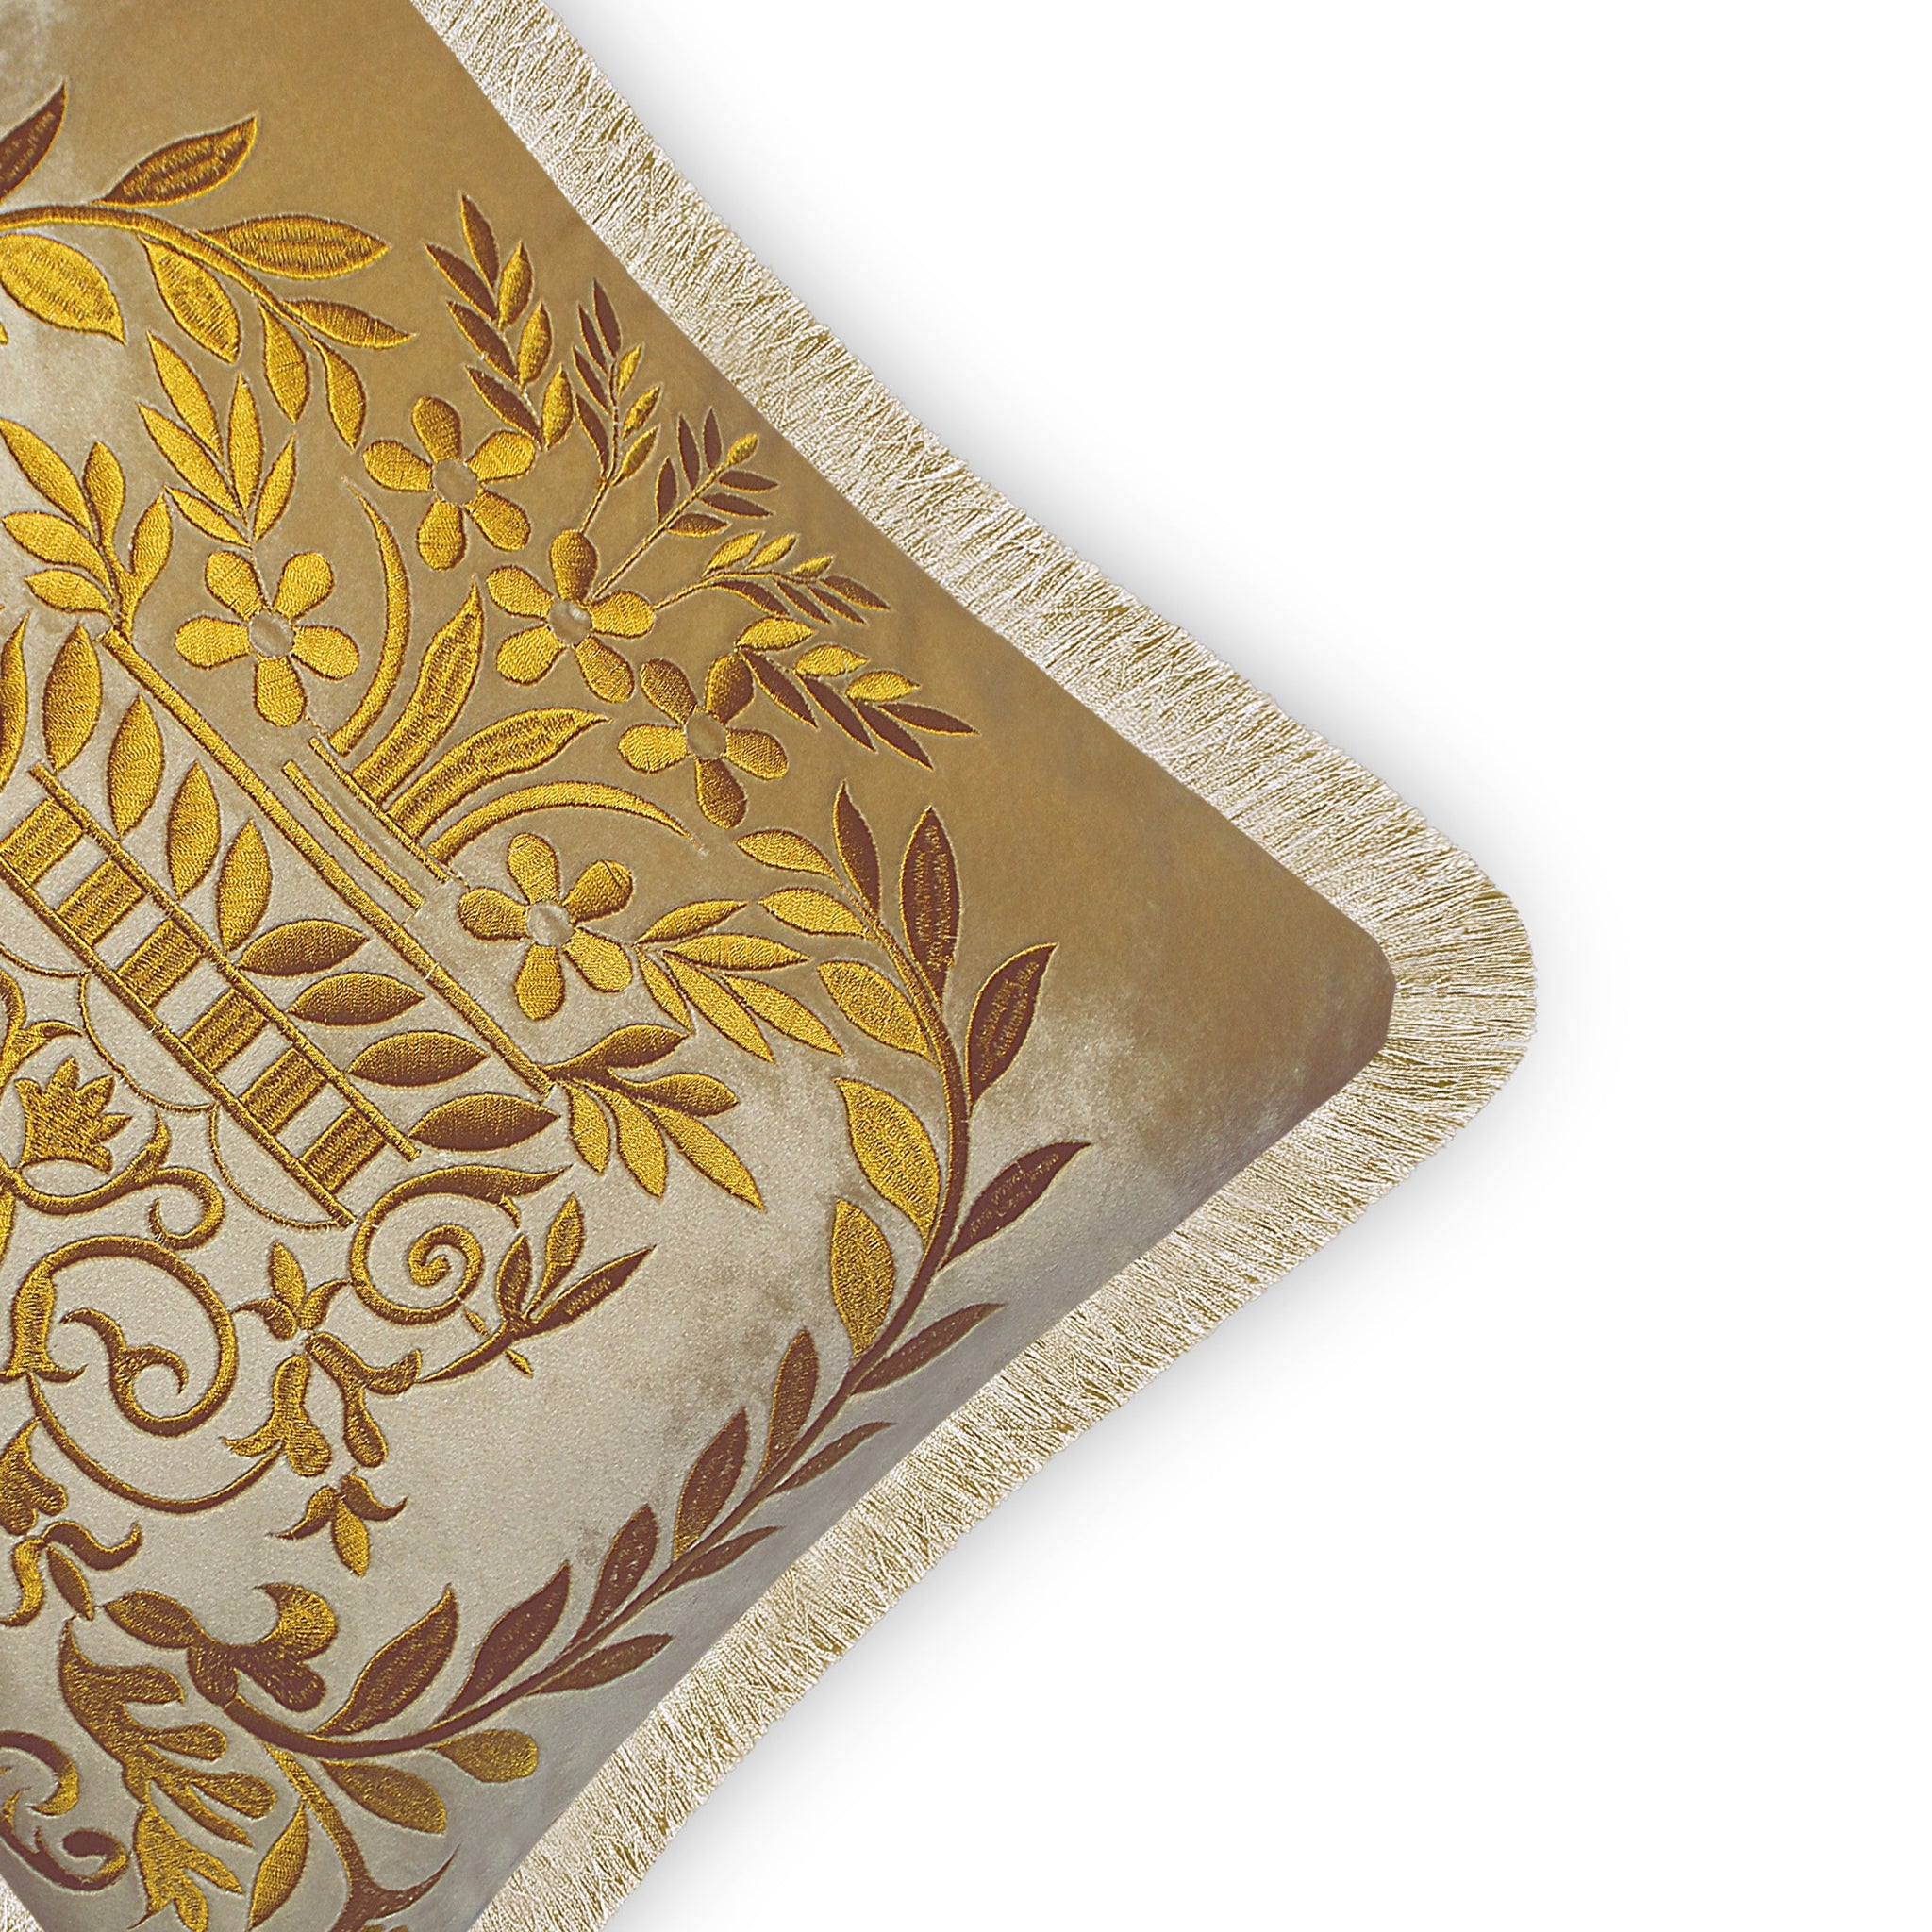 Gold Fringe Embroidery Iconic Baroque Motif Decorative Cushion Cover